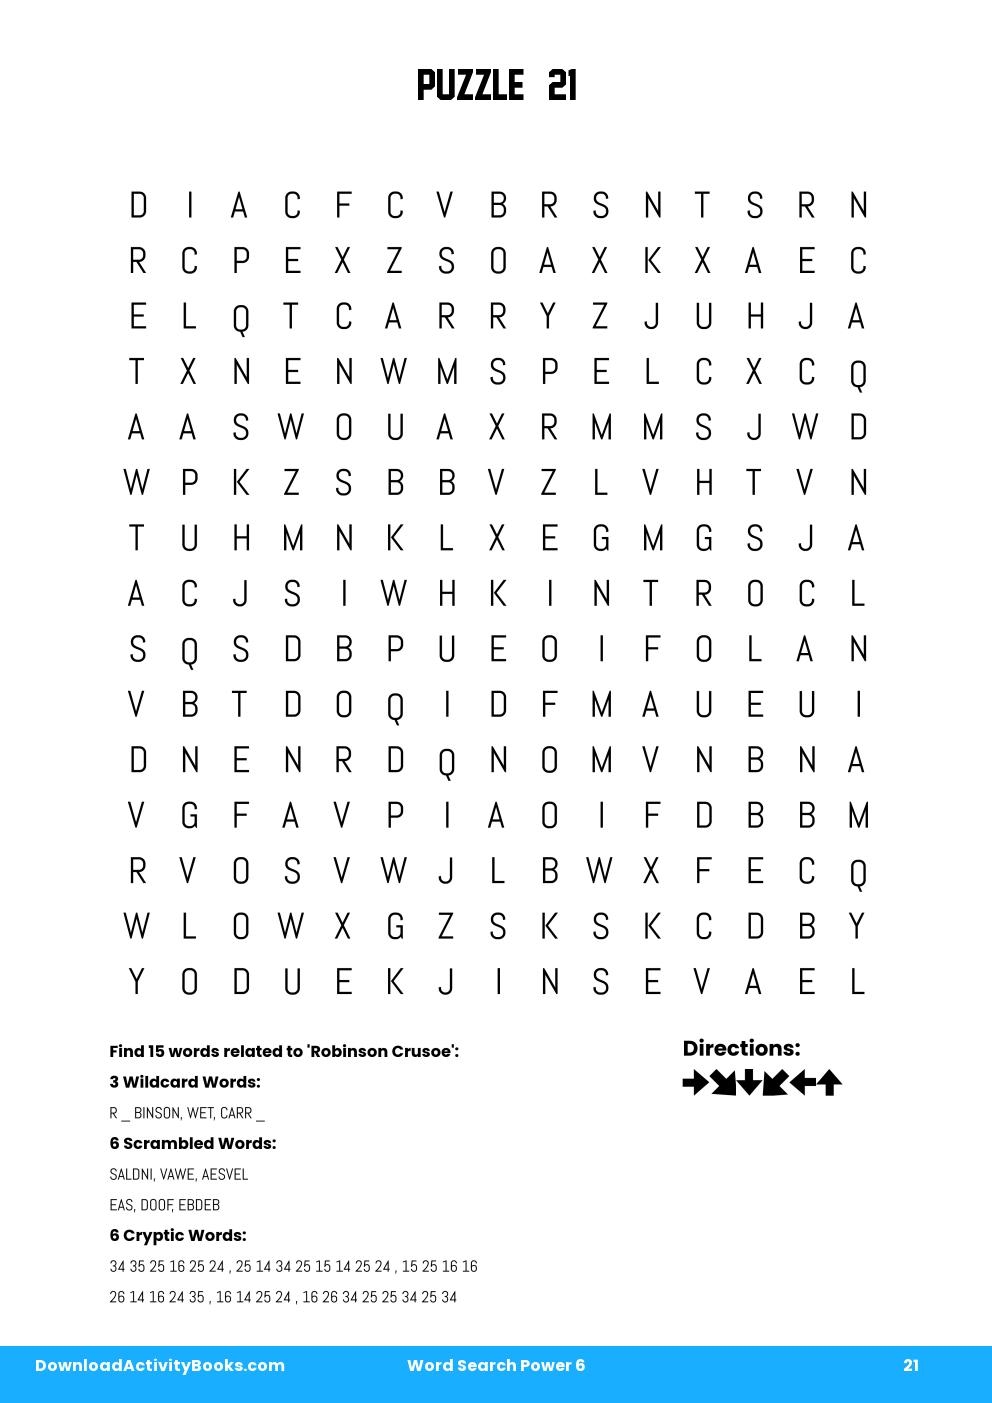 Word Search Power in Word Search Power 6